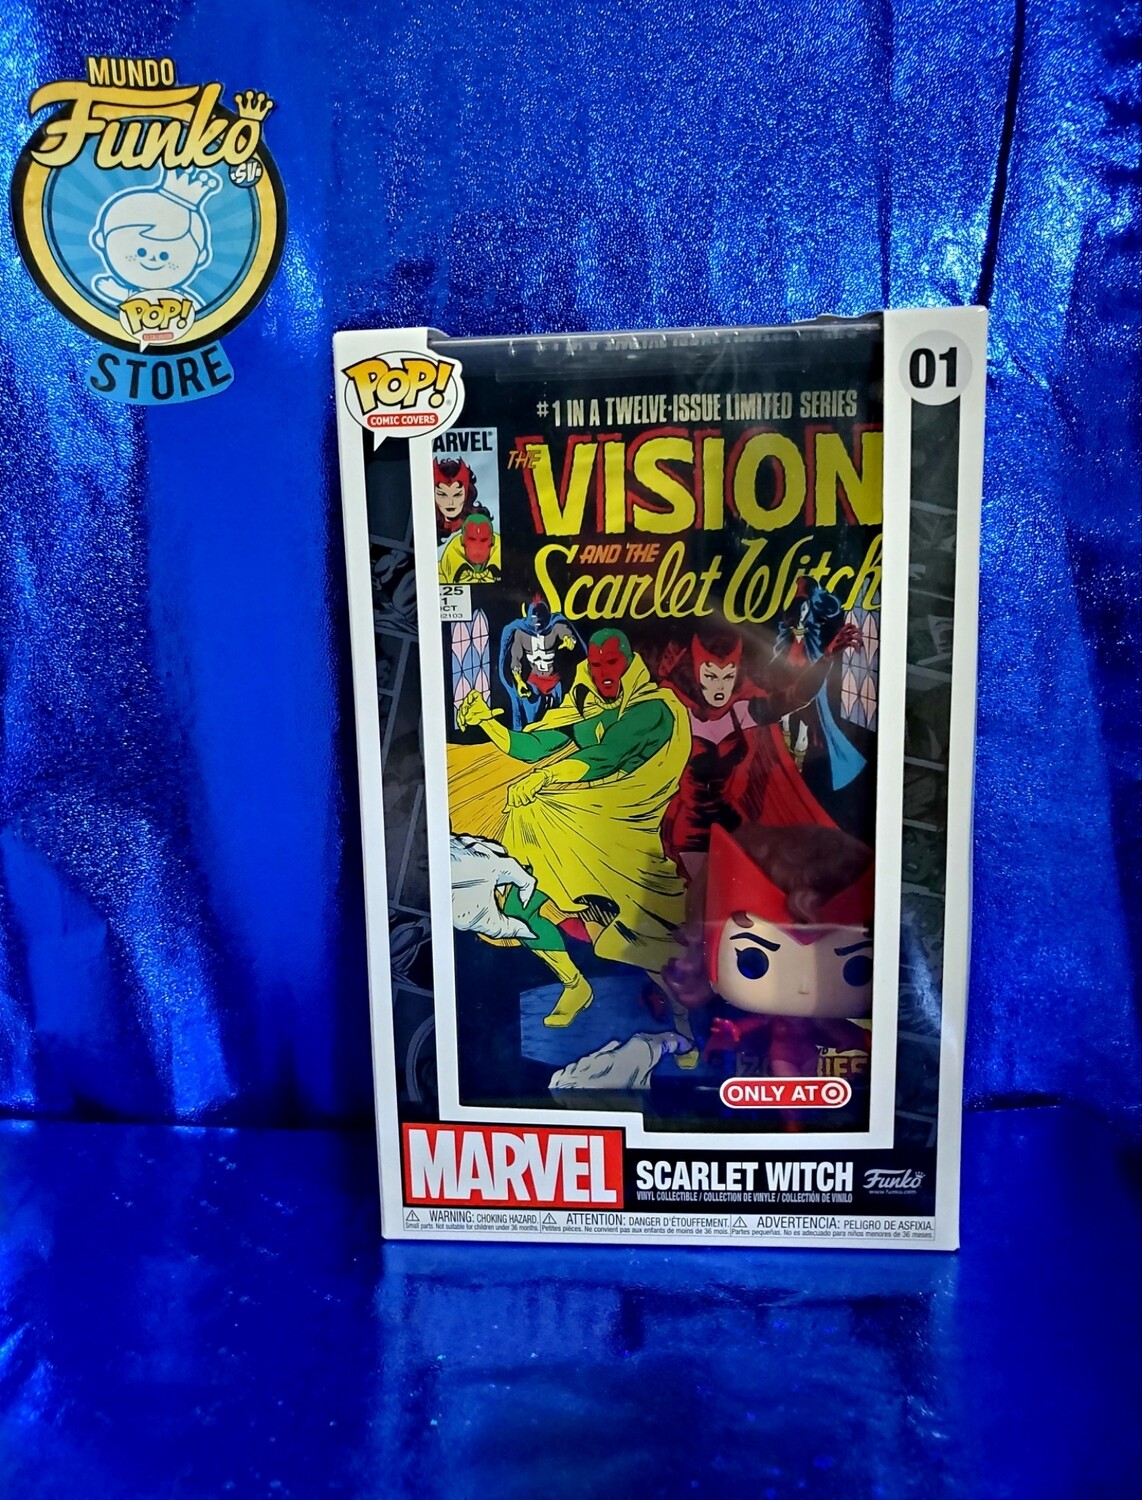 Funko pop! Scarlet Witch Comic Cover